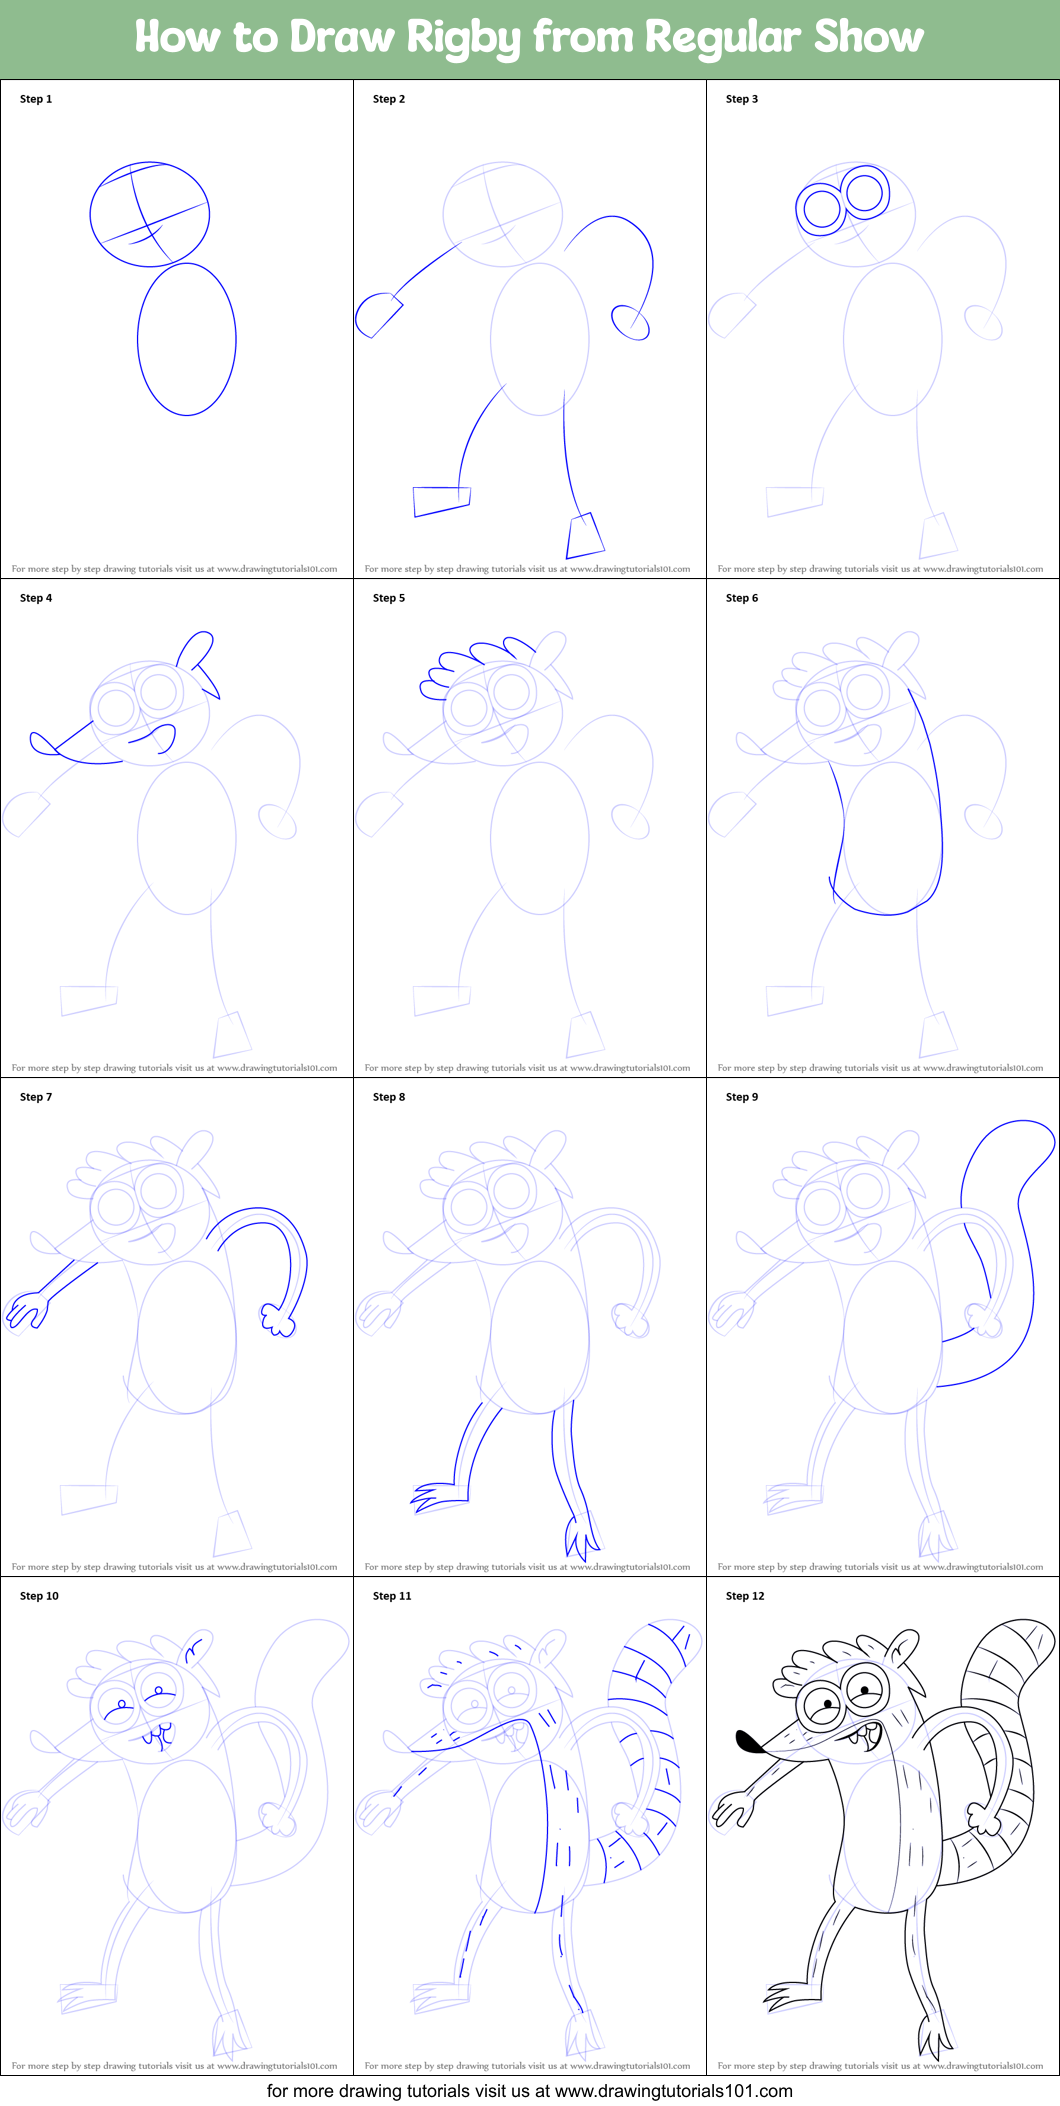 How to Draw Rigby from Regular Show printable step by step drawing